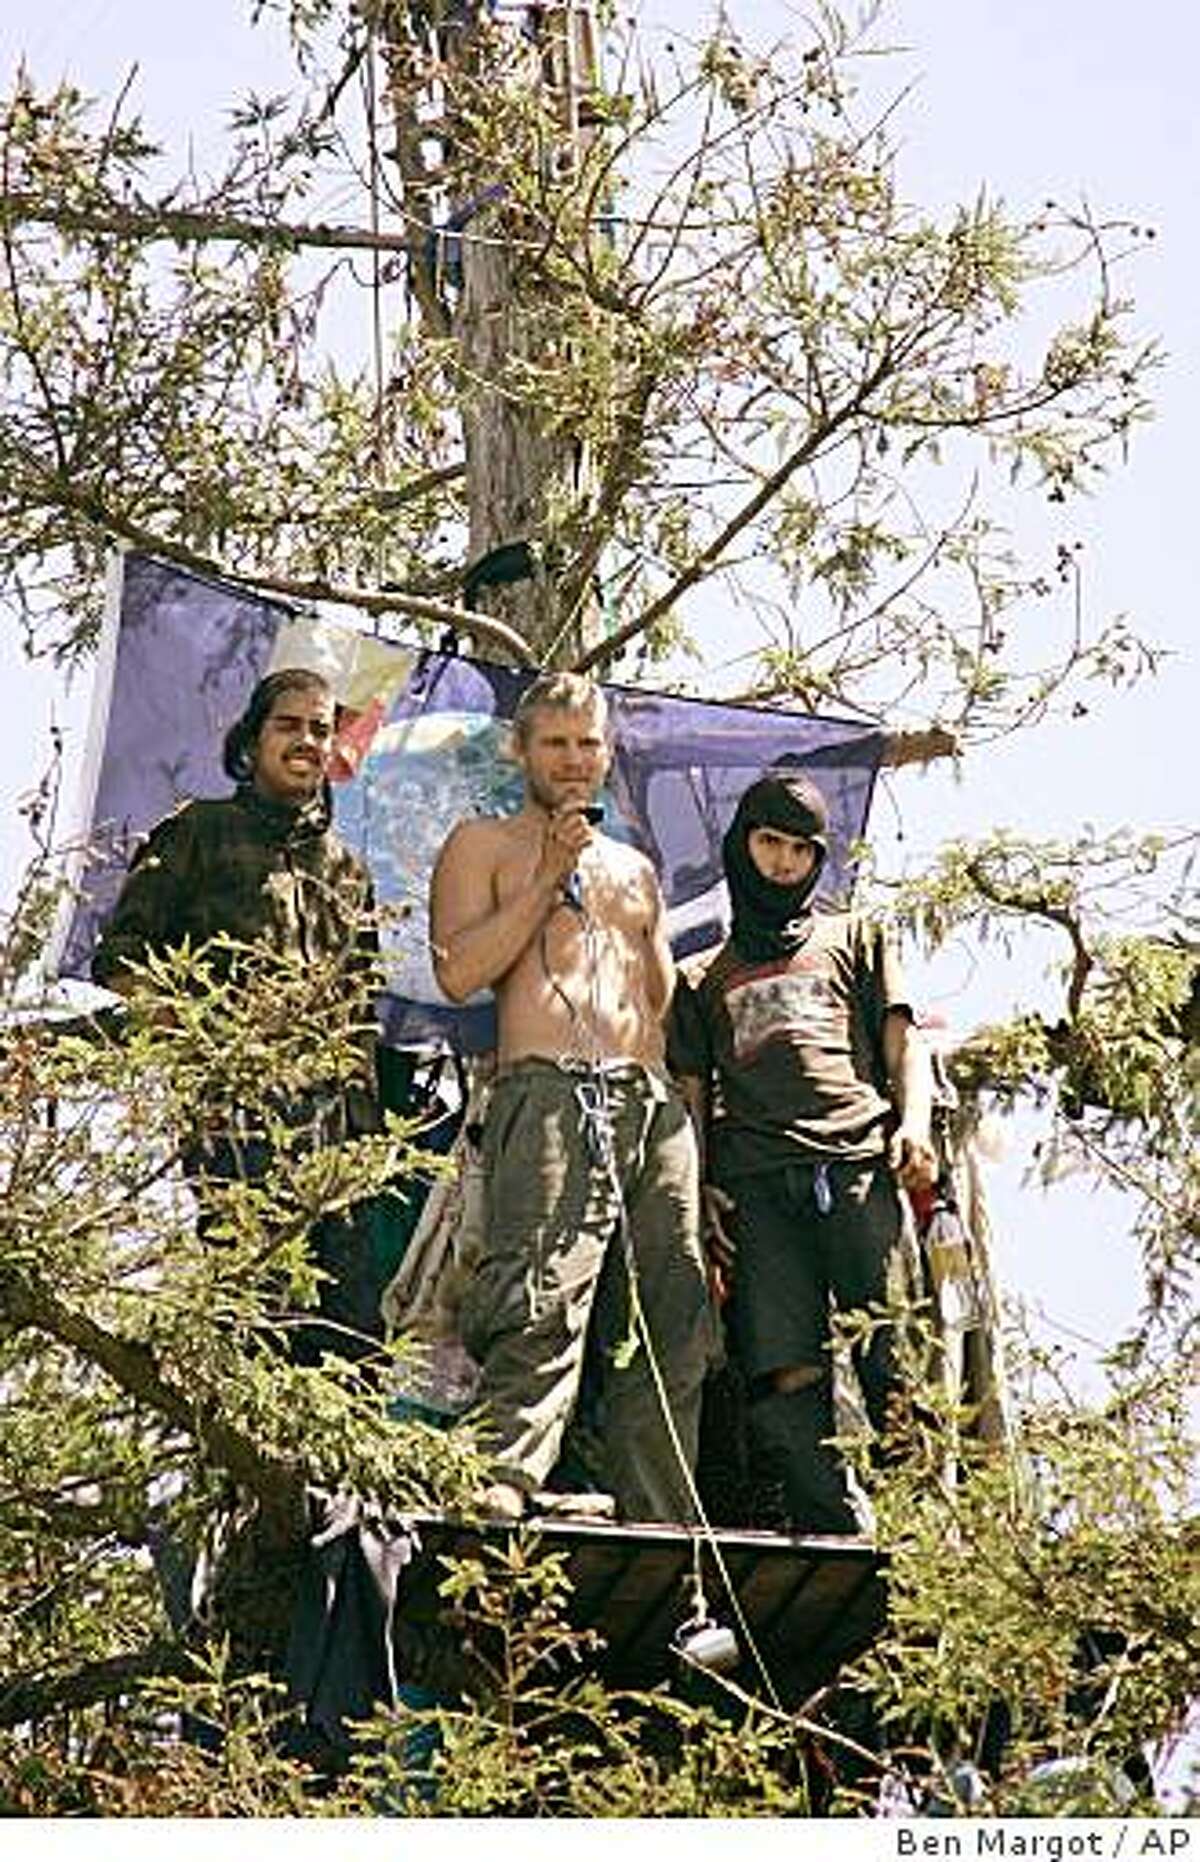 **CORRECTS DAY TO TUESDAY** Protestors who identified themselves, from left, as Mondo, Shem, and David, conduct an interview with a reporter via cell phone while standing near the top of a redwood tree Tuesday, Aug. 26, 2008, in Berkeley, Calif. Protestors have been living in a grove of oak trees that the university wants to cut down so it can build a new sports training center next to its football stadium for over a year. (AP Photo/Ben Margot)